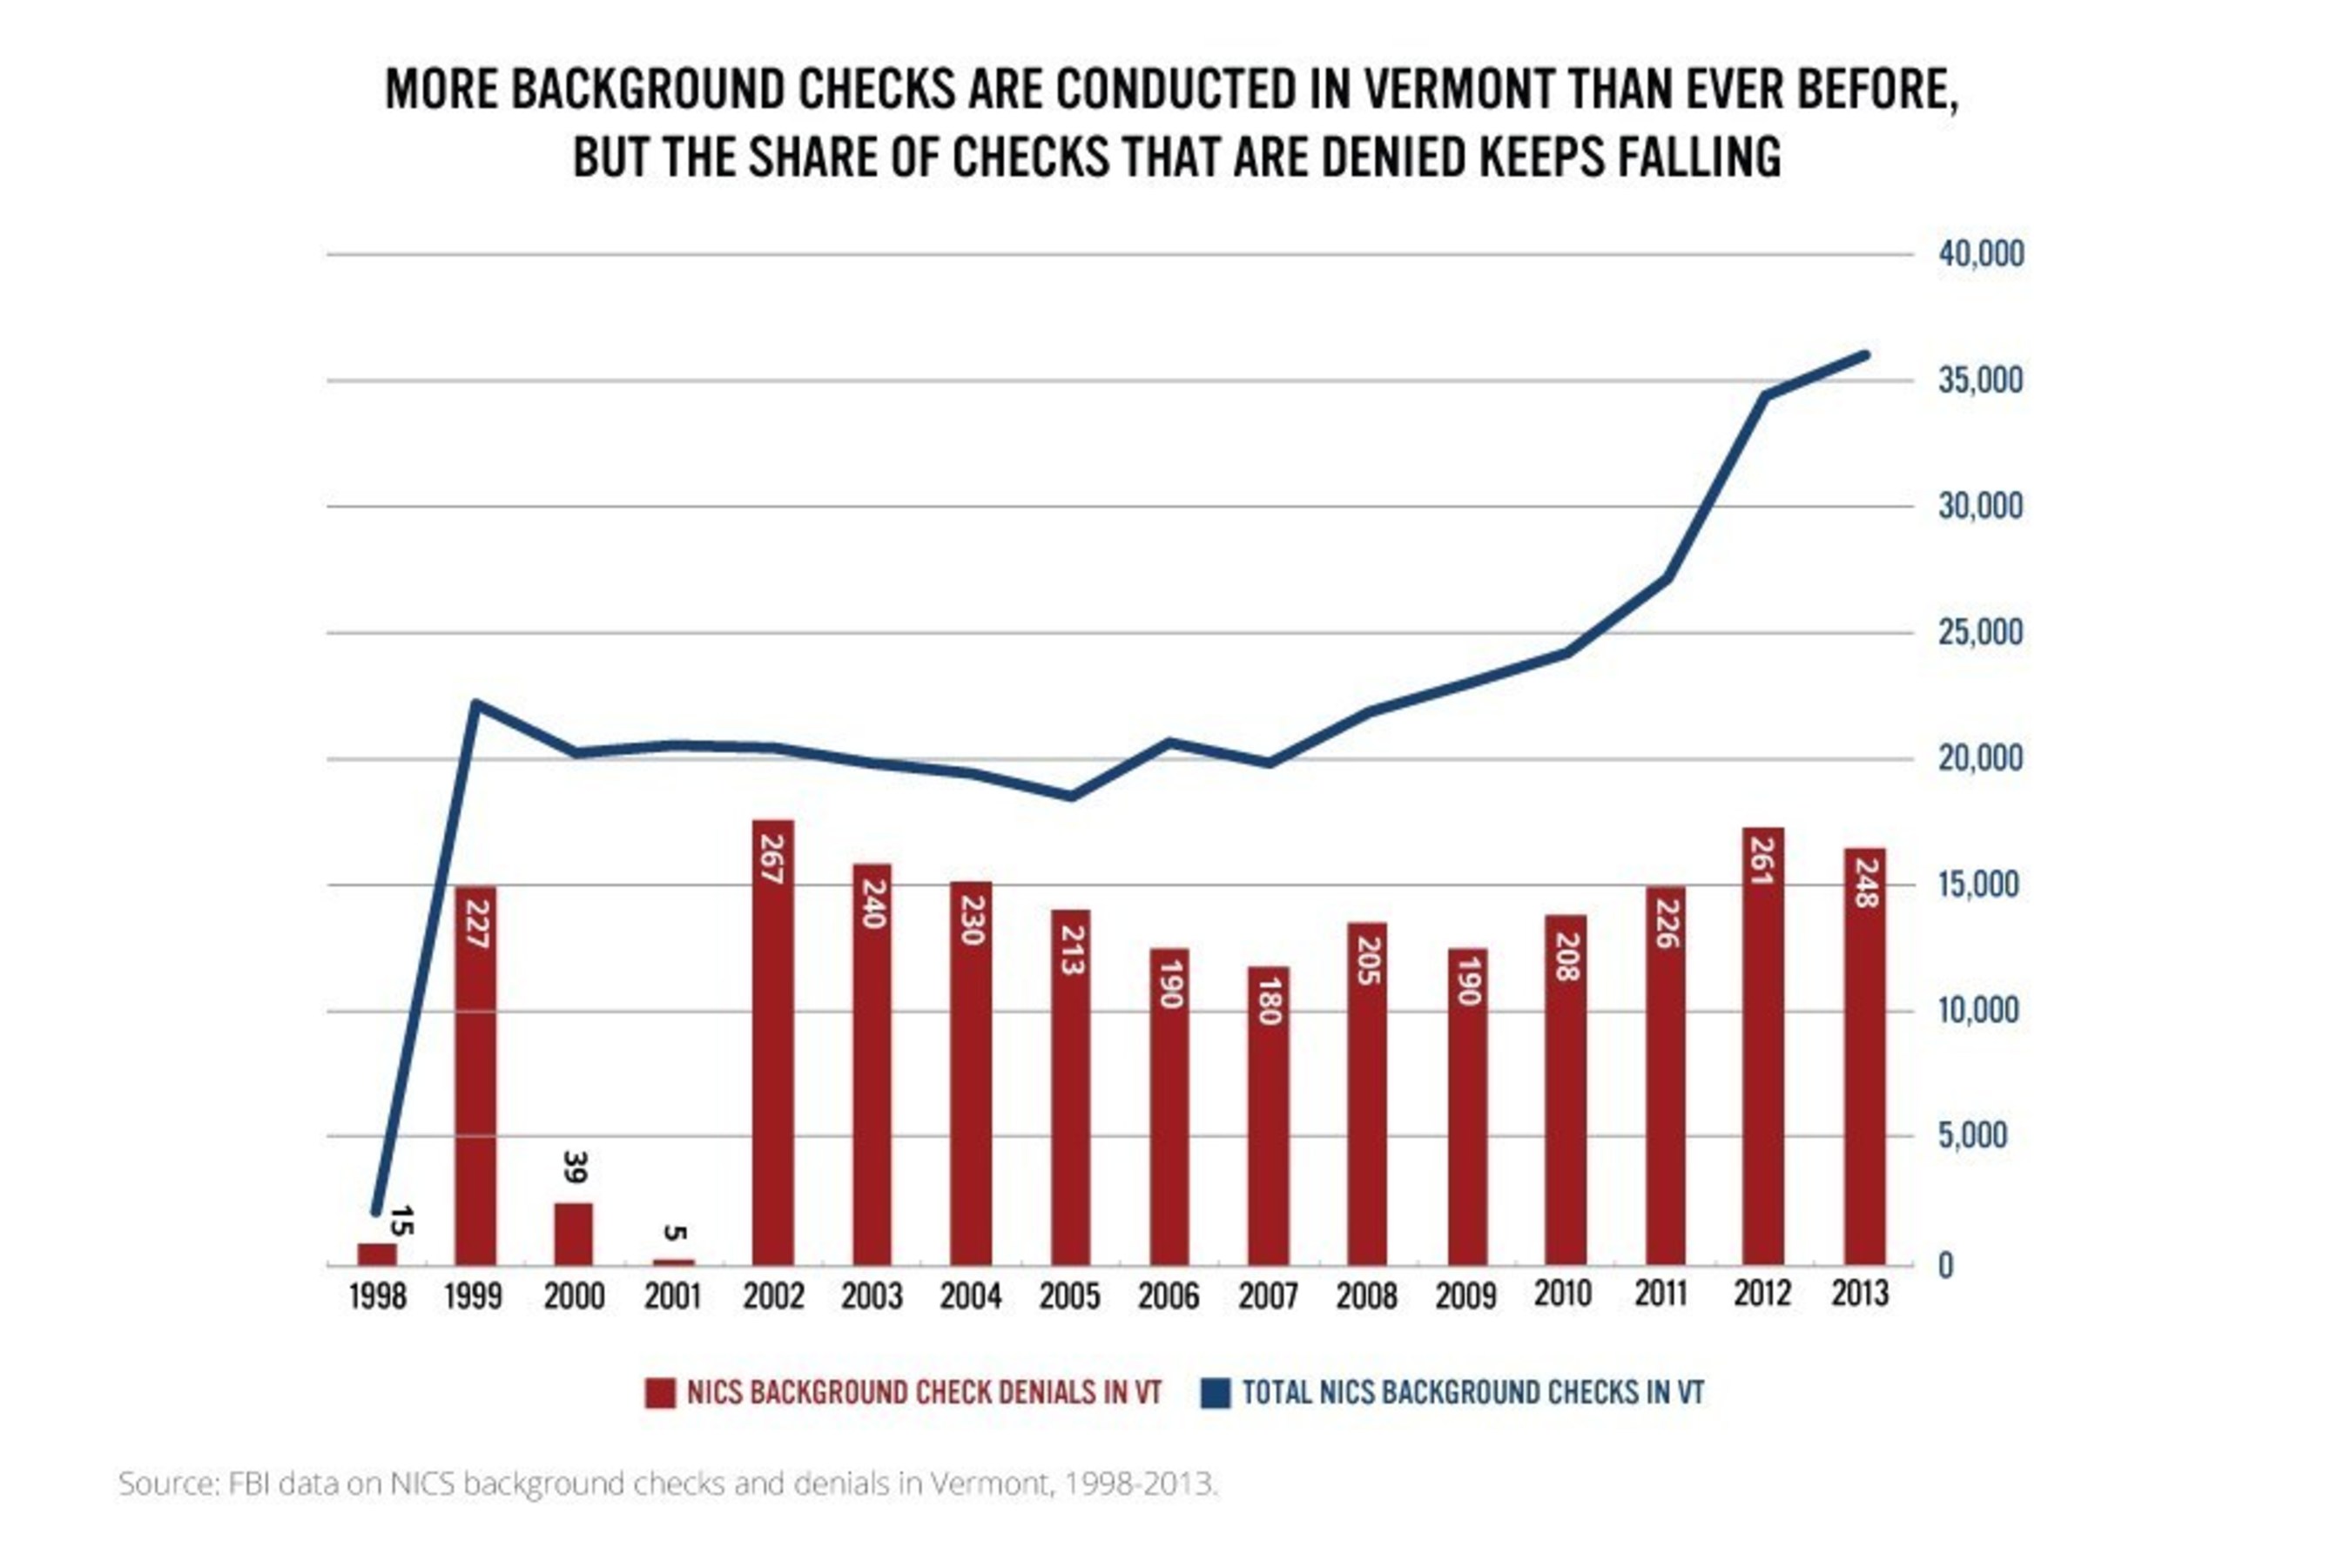 More background checks are conducted in Vermont than ever before, but the share of checks that are denied keeps falling